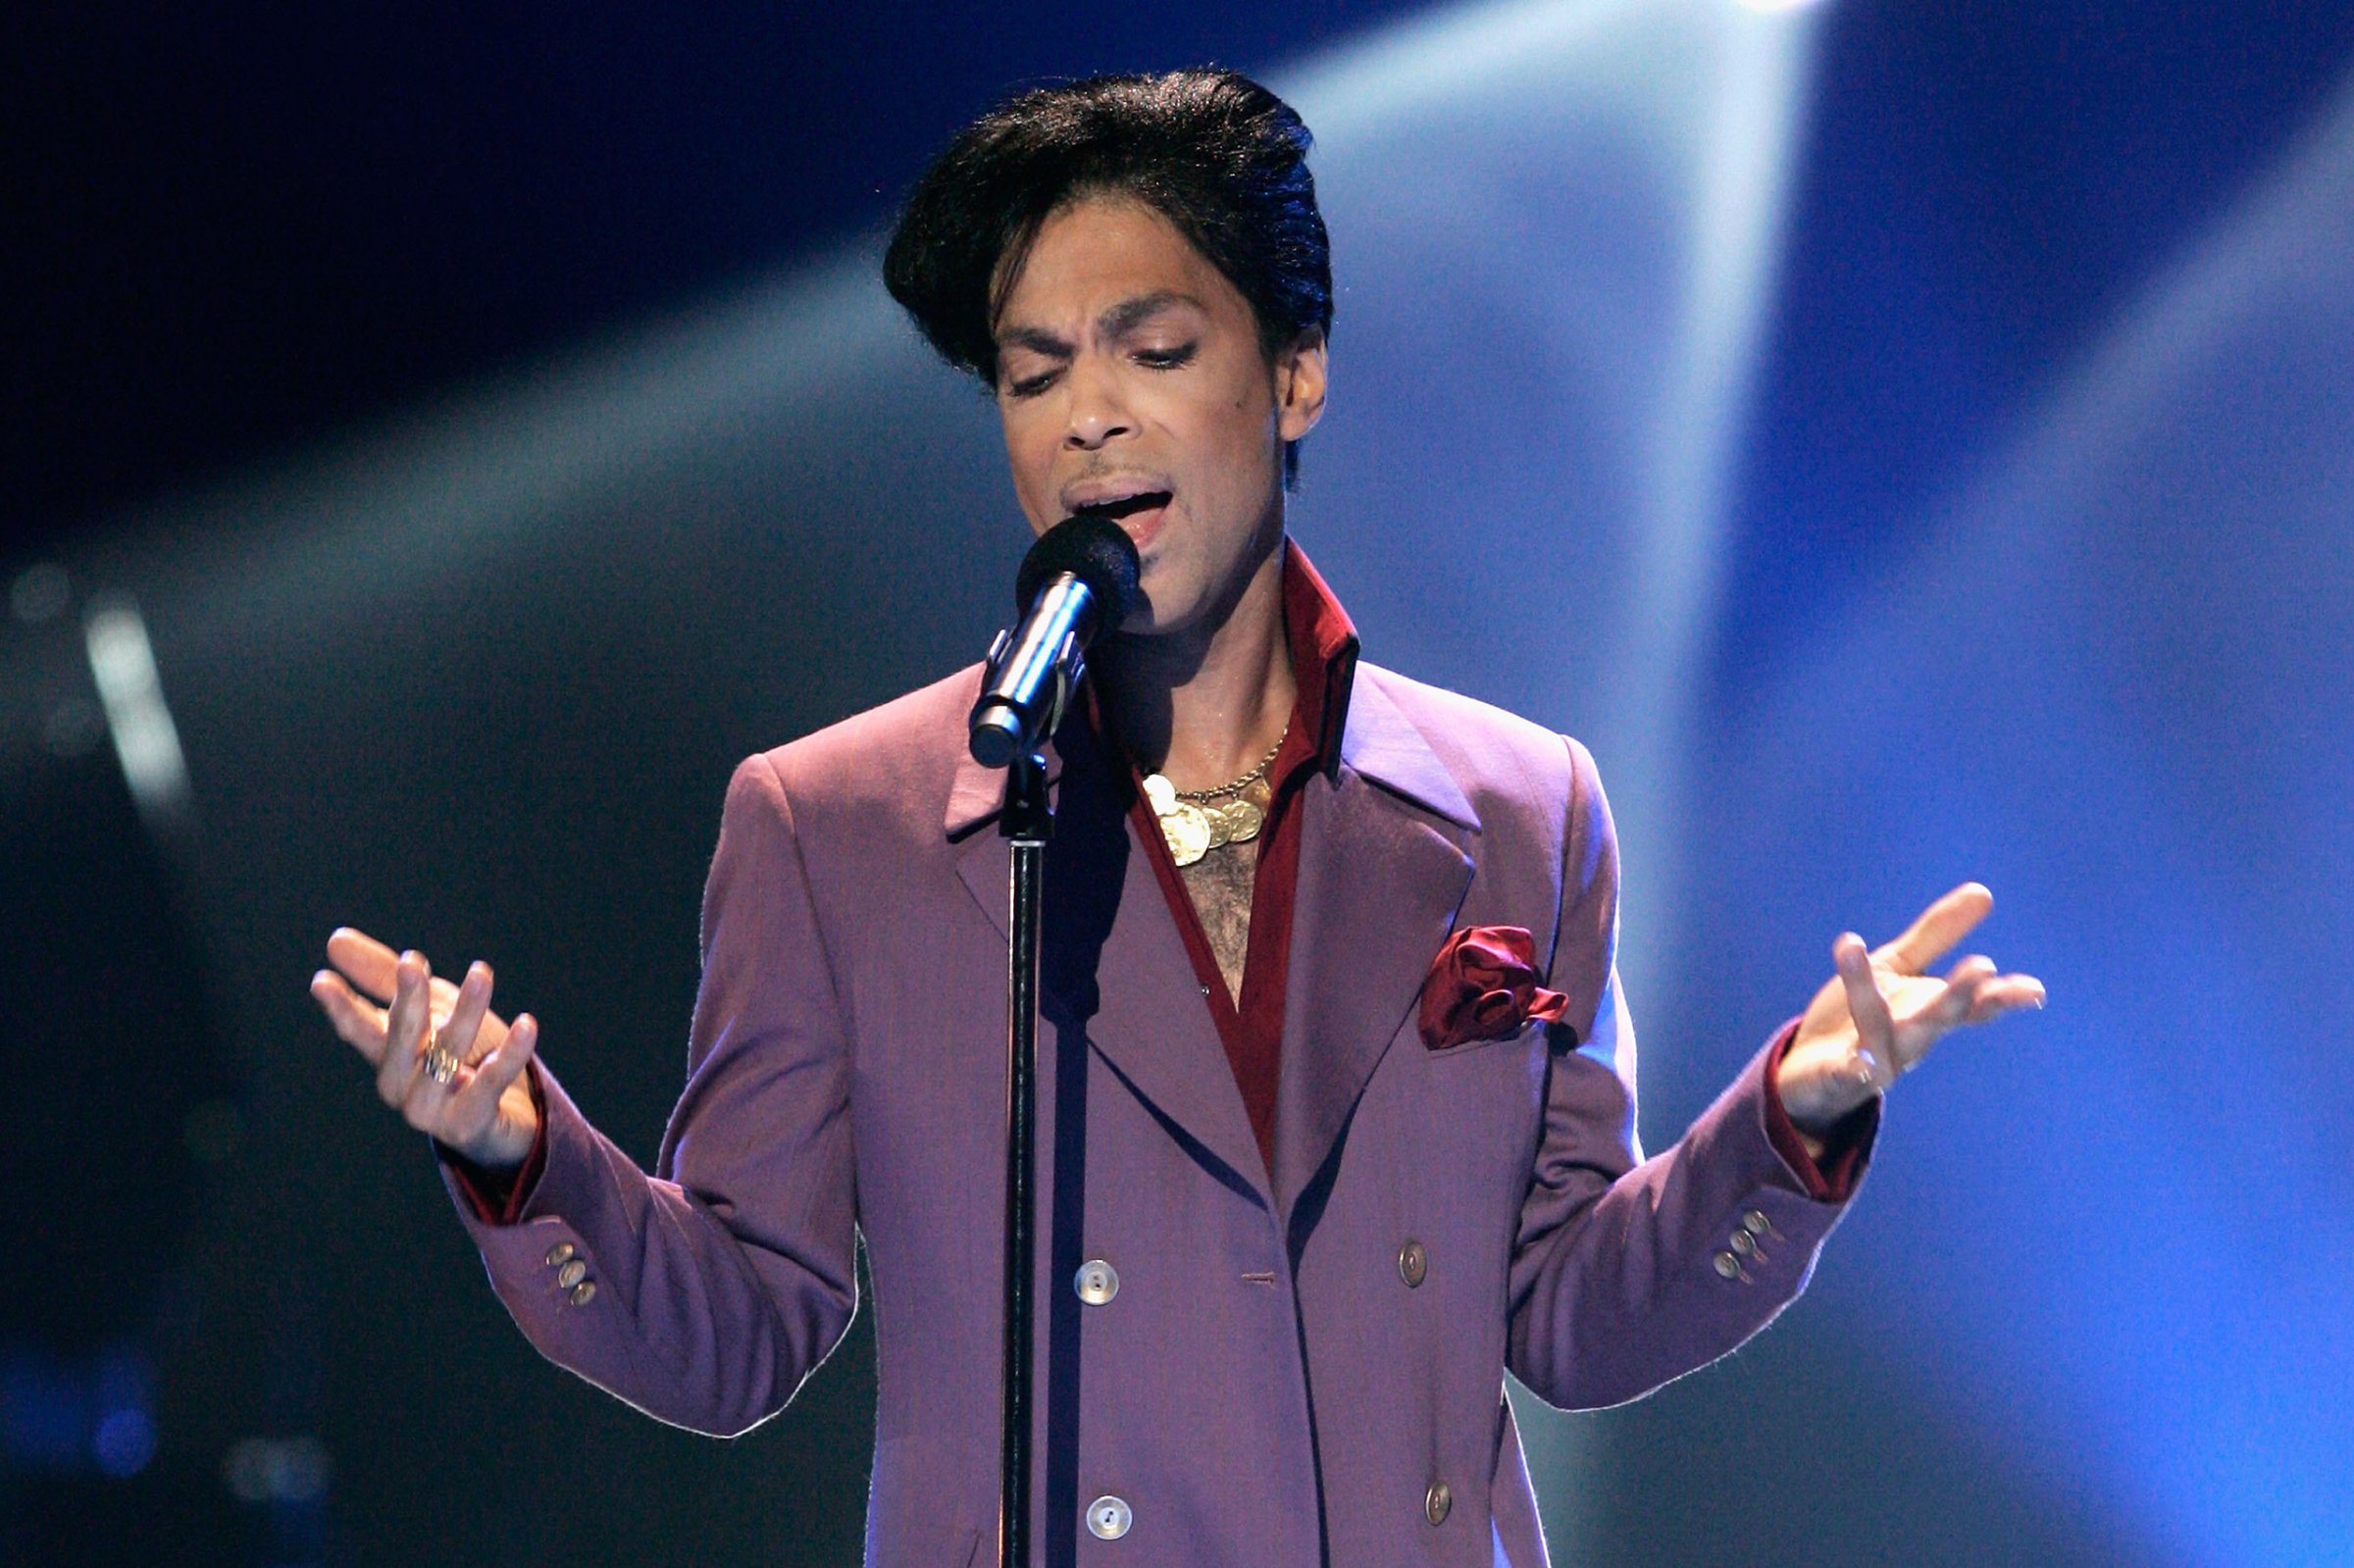 Prince performs onstage during the American Idol Season 5 Finale at the Kodak Theatre in Hollywood, California, on on May 24, 2006.